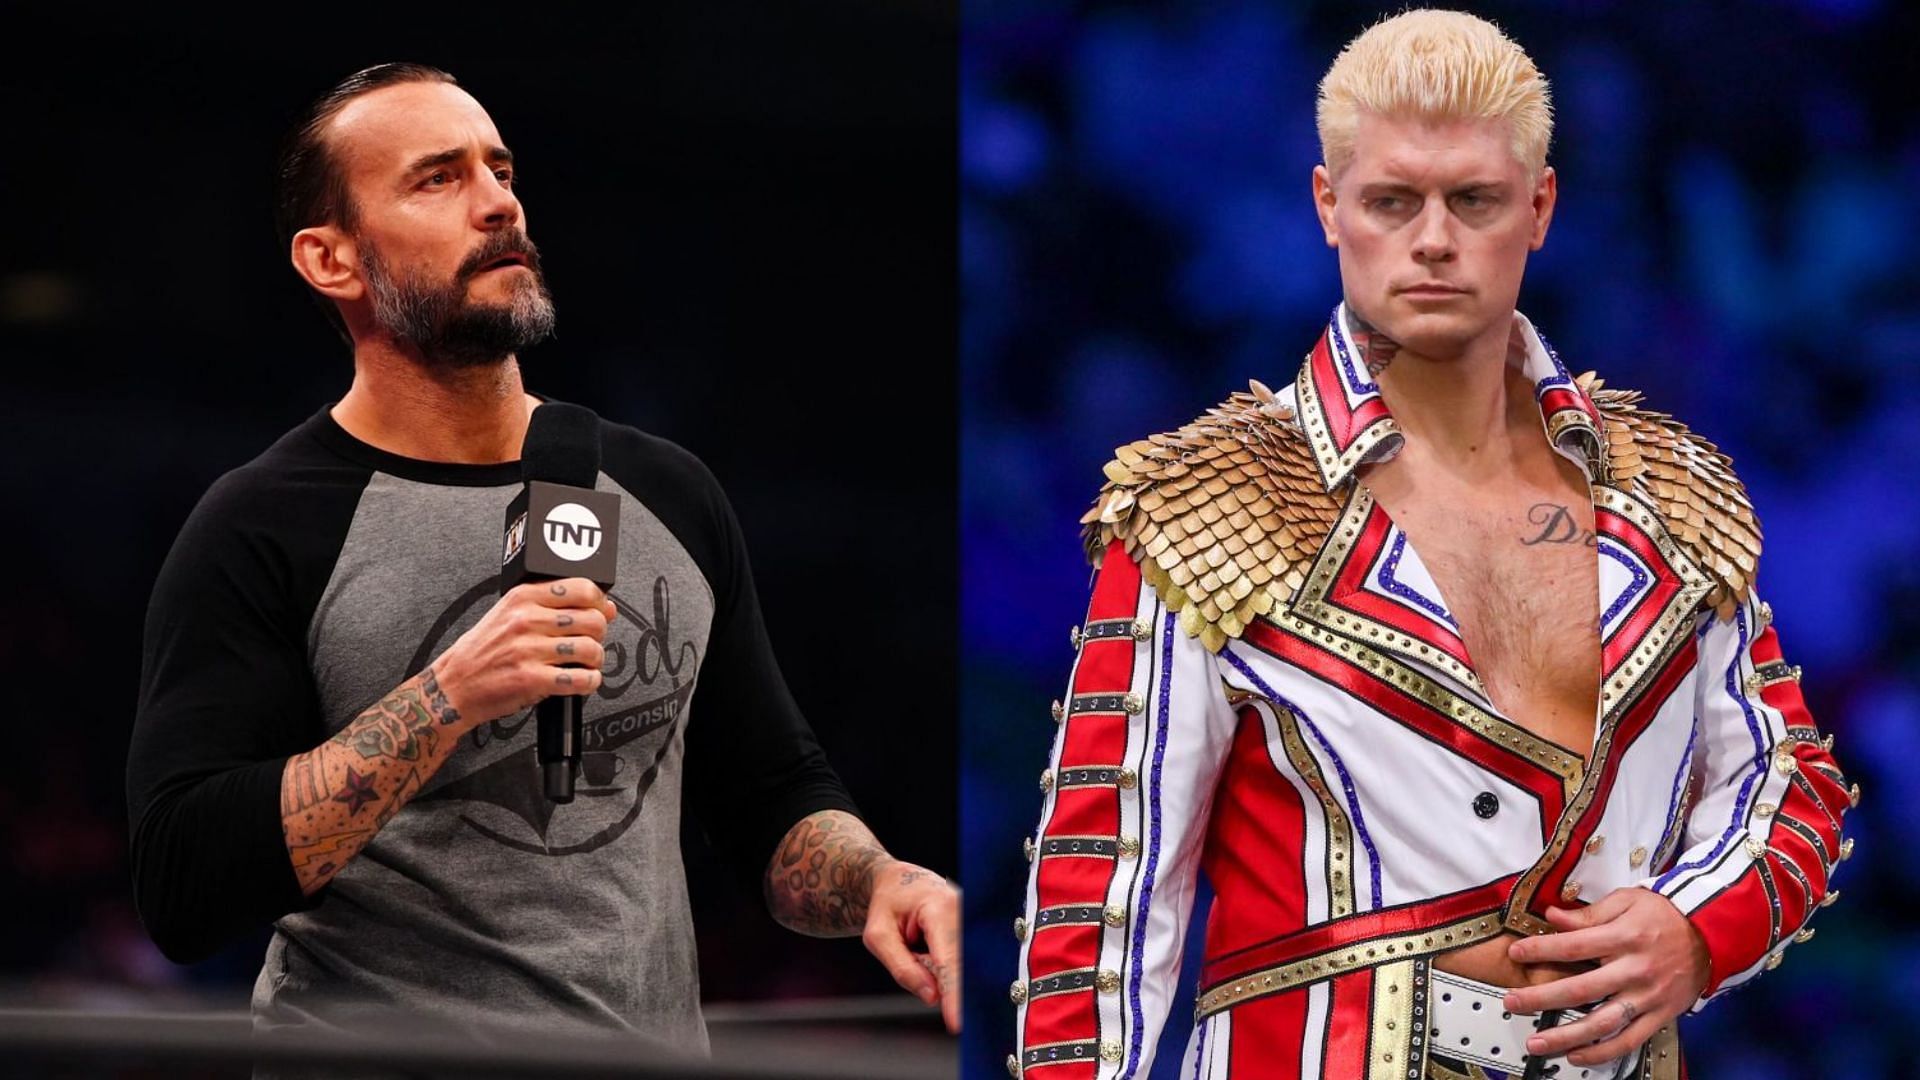 Has the Brawl Out Incident created bad blood between CM Punk and Cody Rhodes?